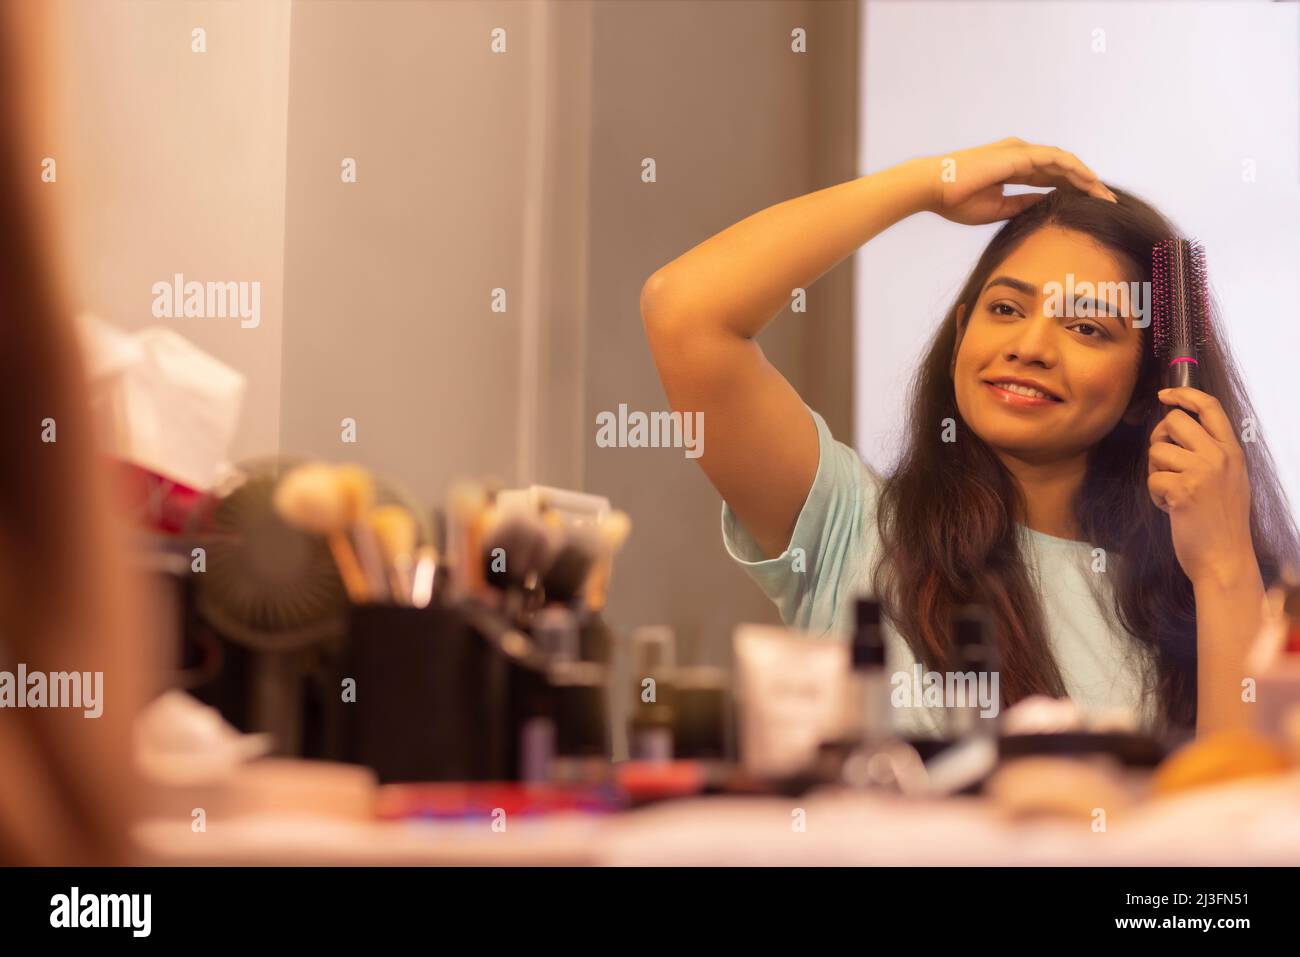 Young woman combing her hair in front of mirror Stock Photo